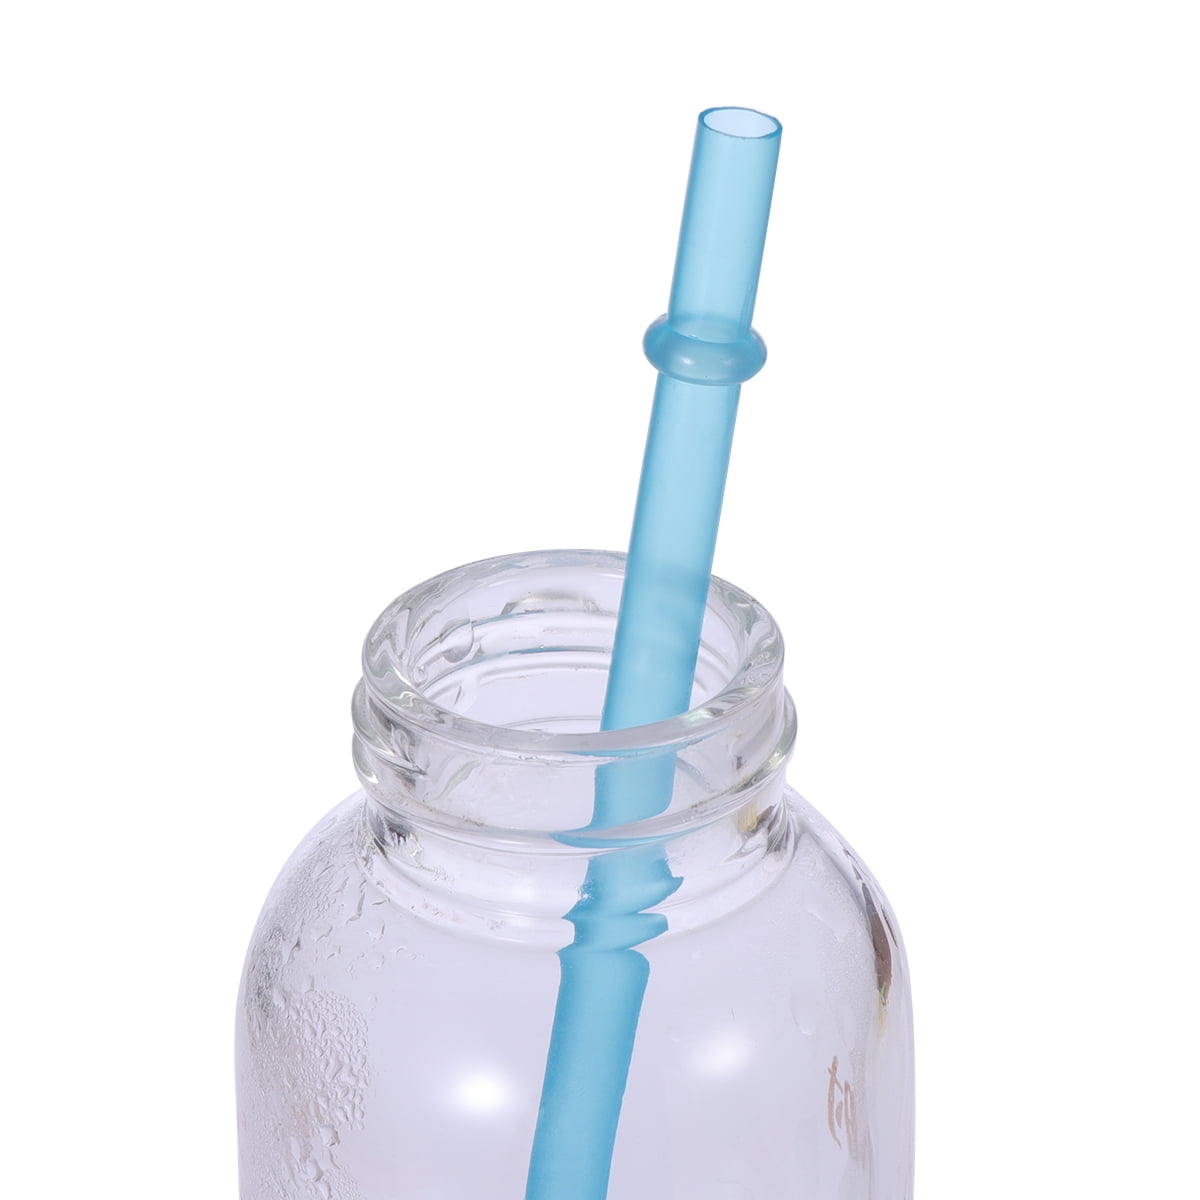 33 Pieces Reusable Plastic Straws Fit for Mason Jars, Tumblers, 9 Inches  Transparent Colored Unbreakable Drinking Straws with 1 Straw Carrying Case